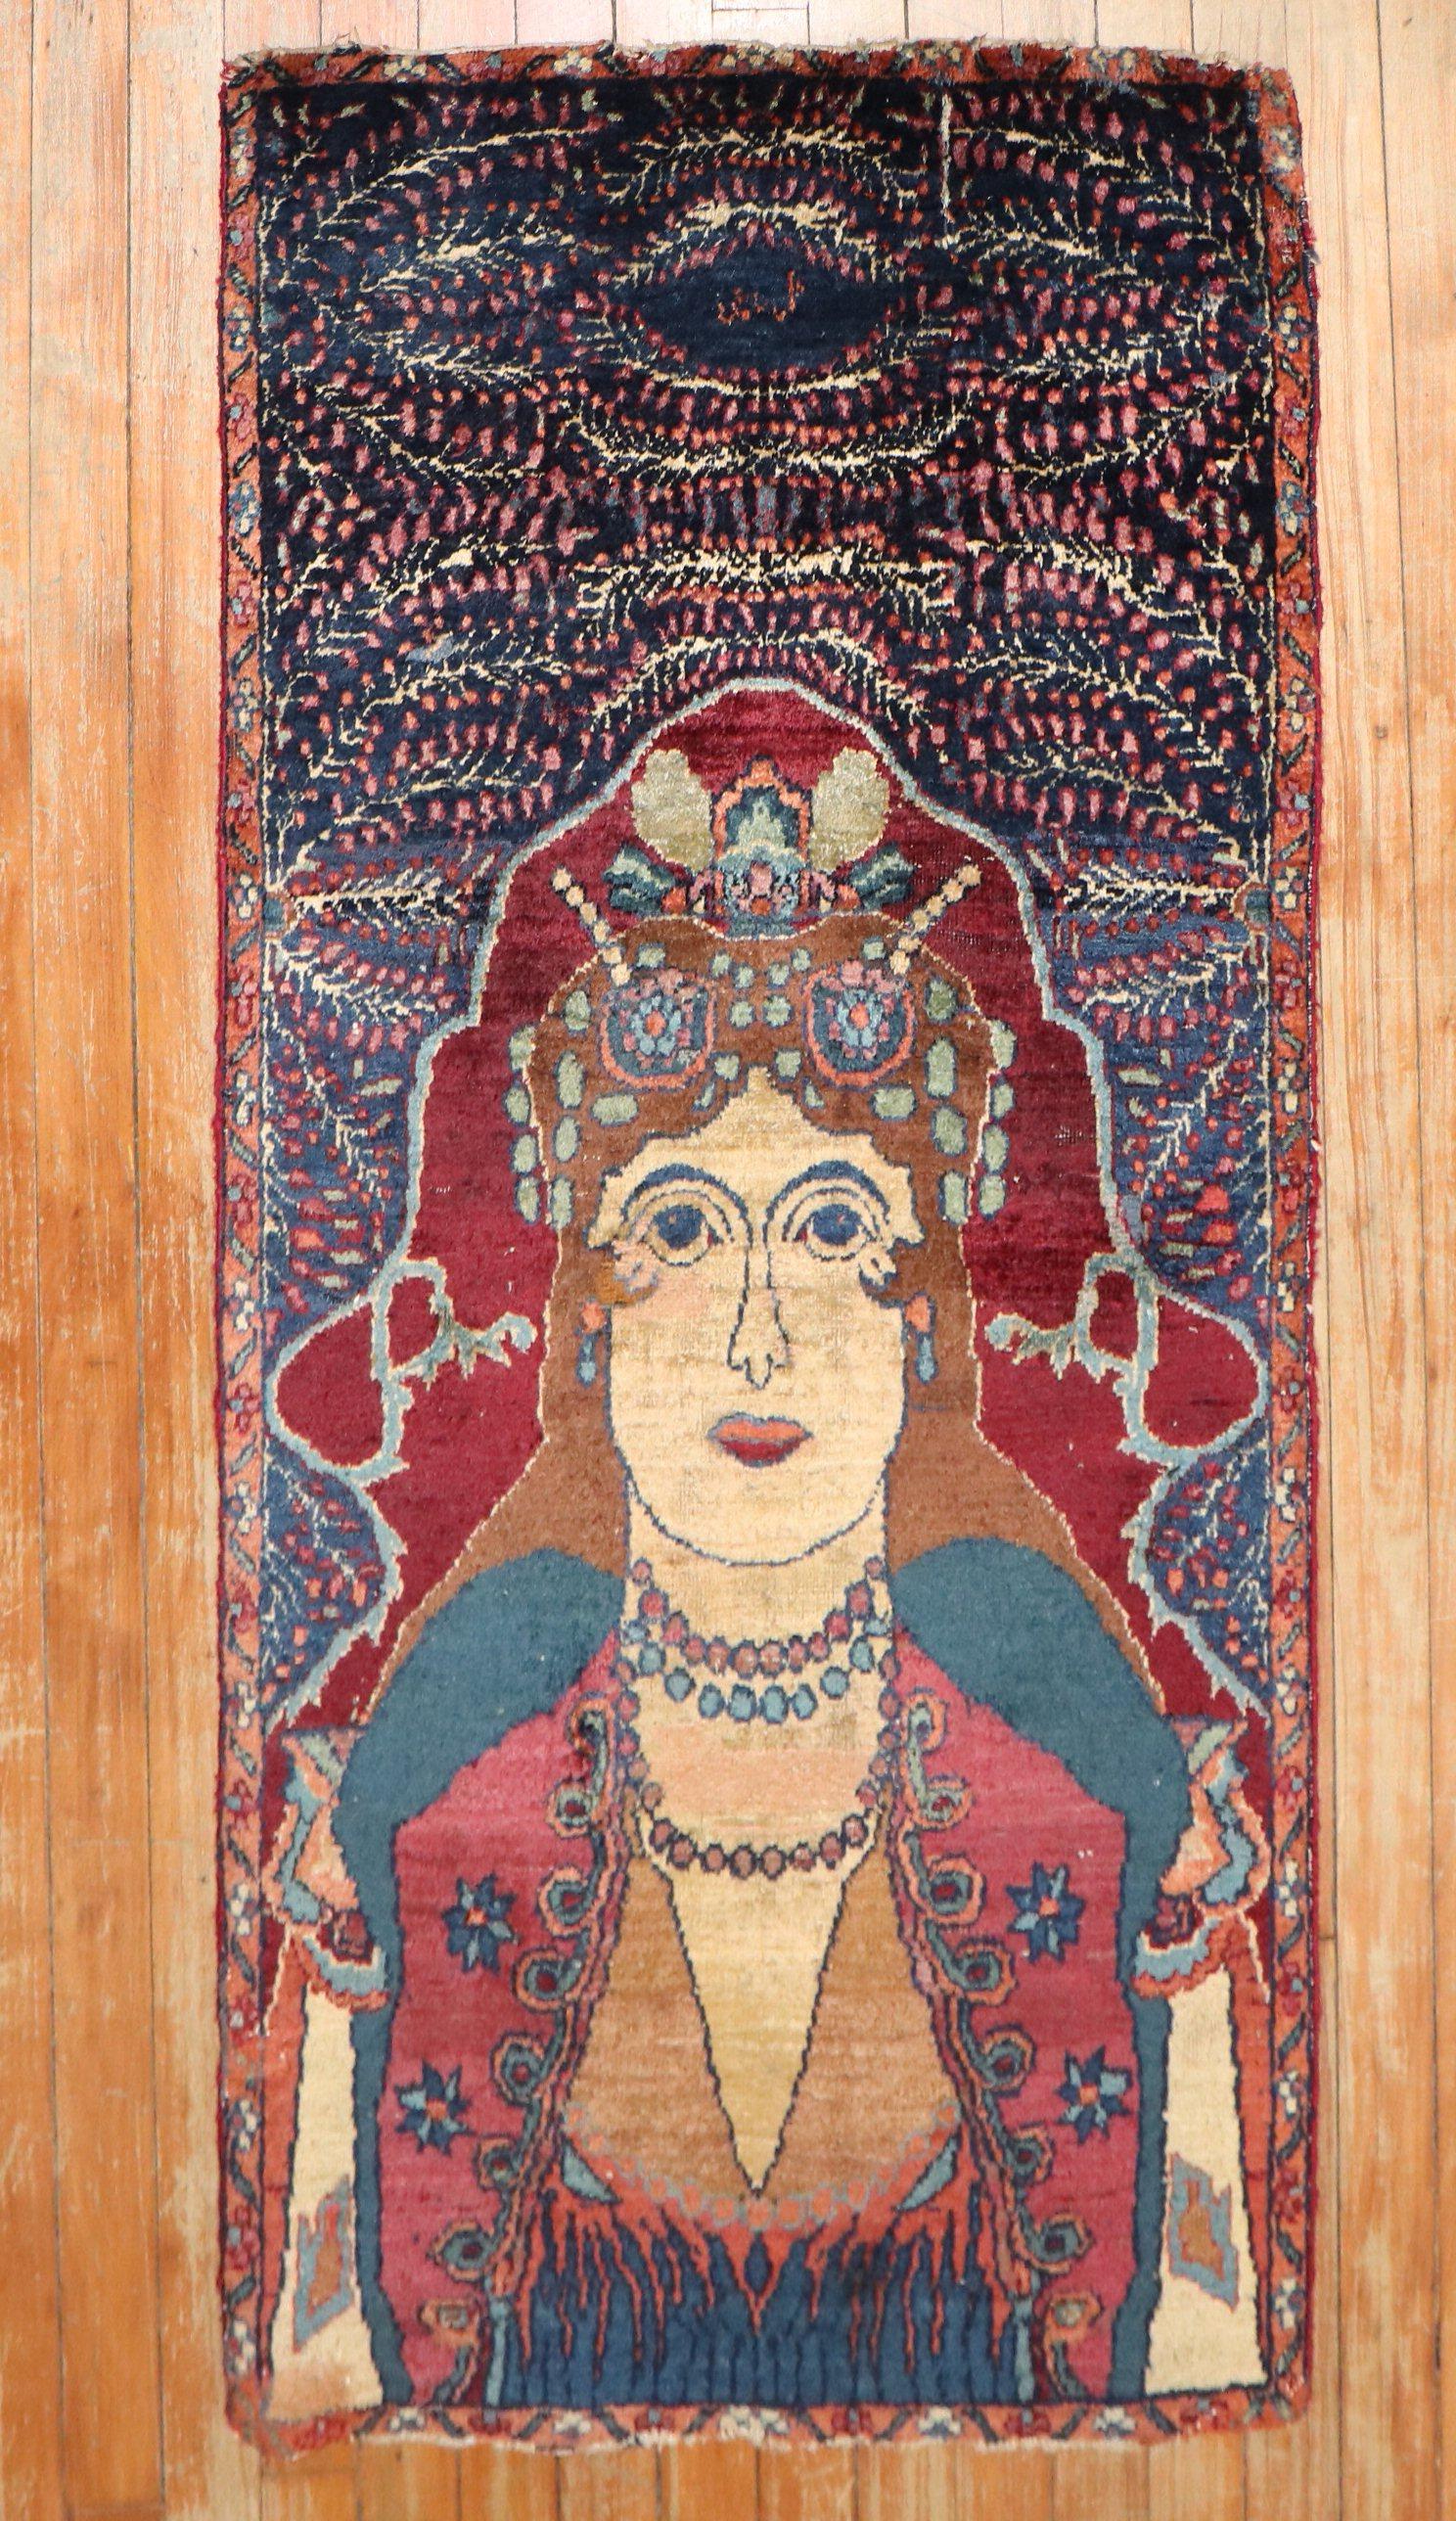 An early 20th century Persian pictorial rug what looks to be some sort of goddess queen

Measures: 2'1'' x 4'3''